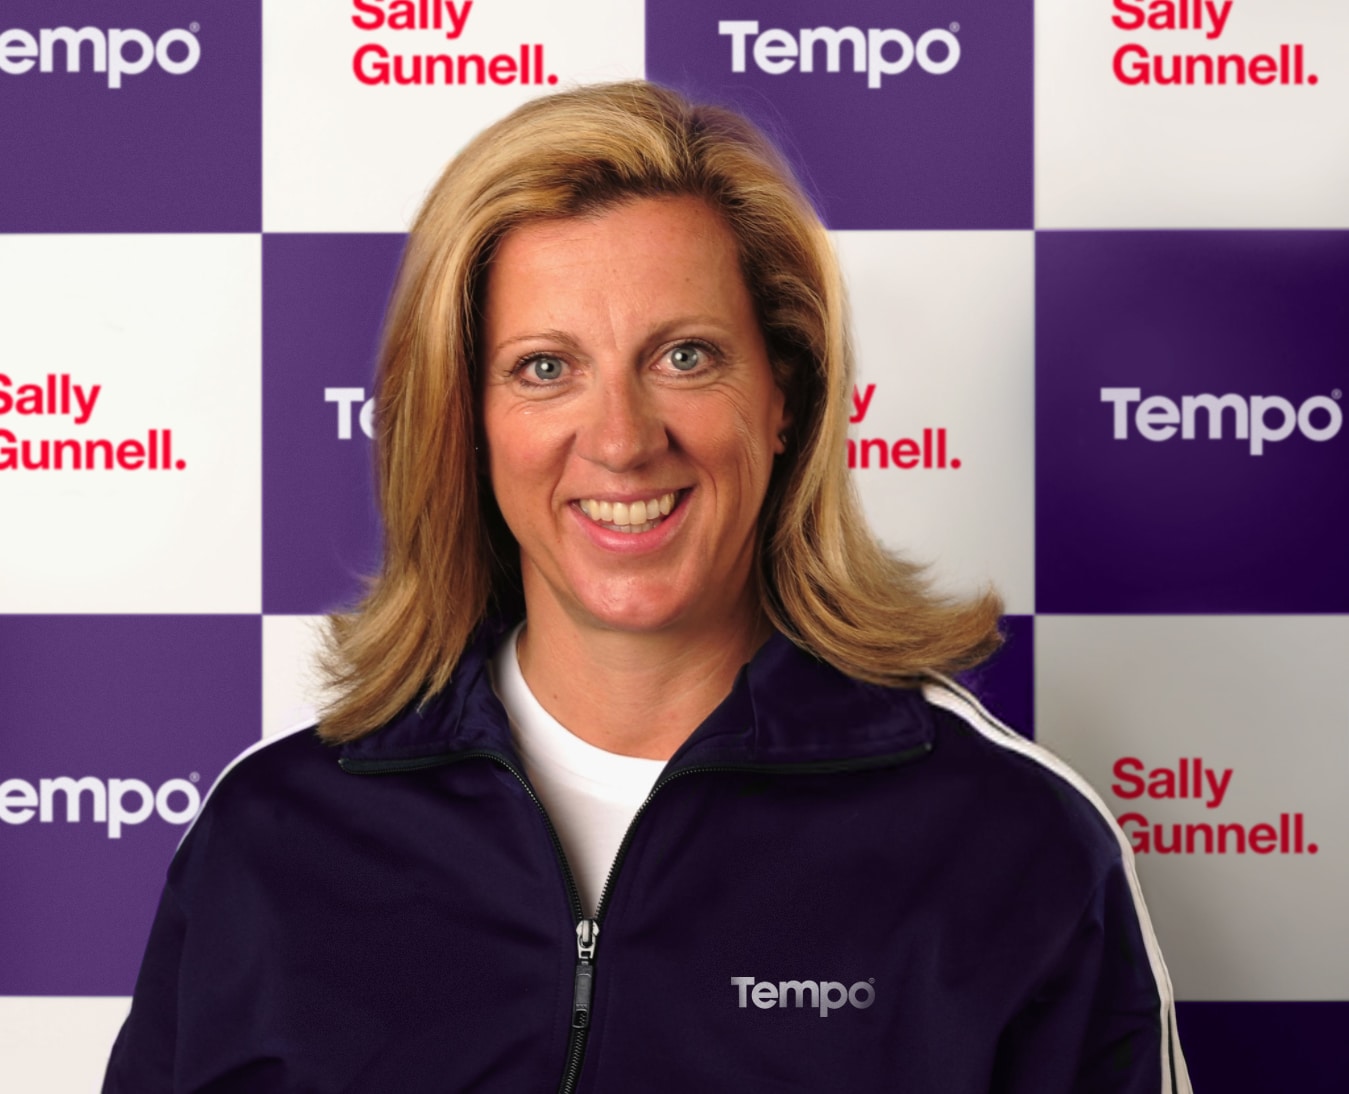 Sally gunnell joins tempo, the first sports nutrition brand dedicated to active over 50s